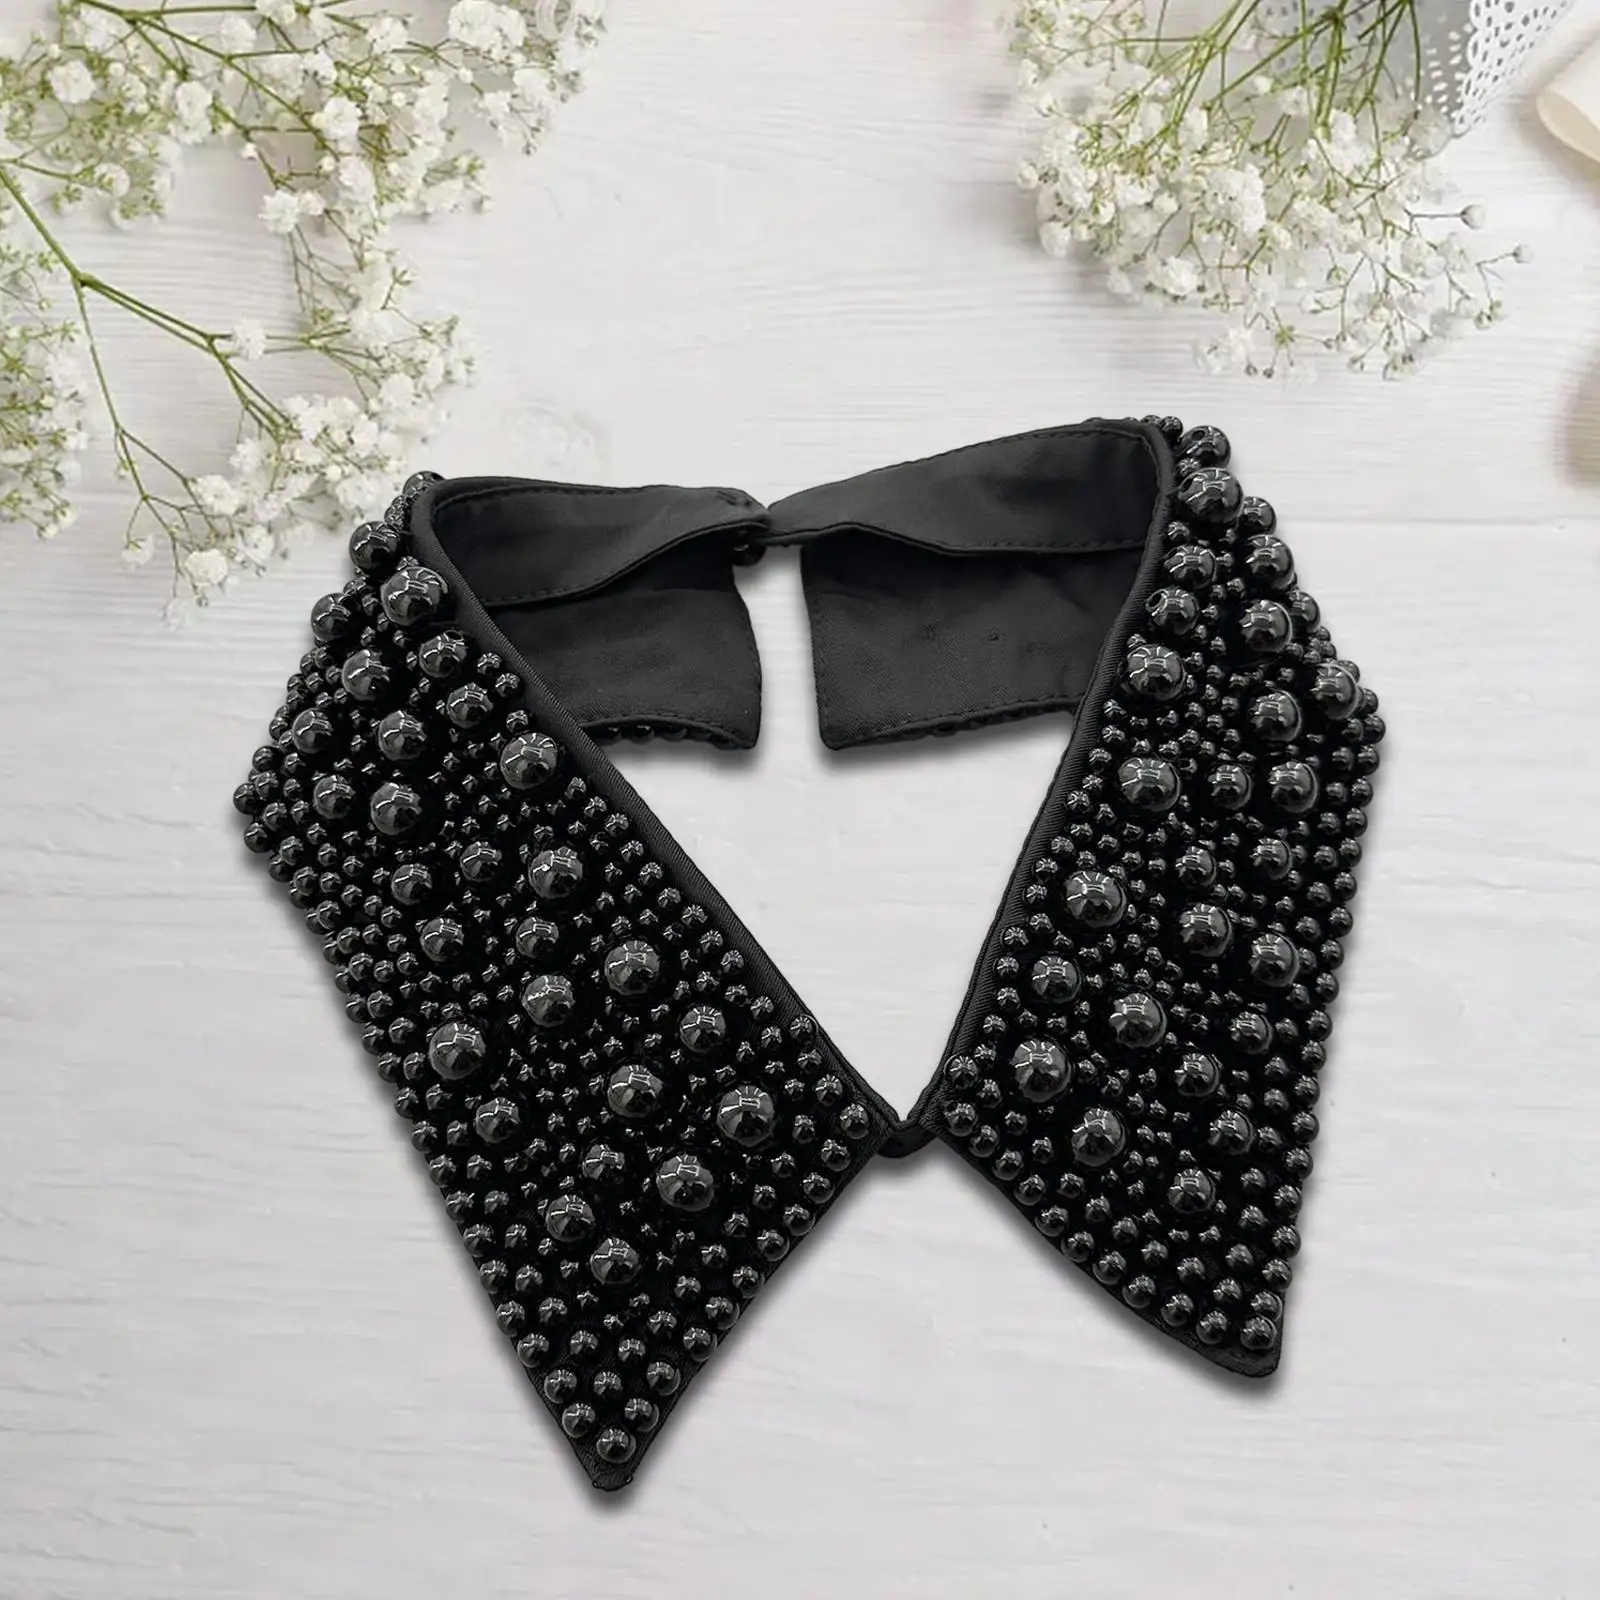 False Collar Casual Necklace Collar Women Costume Accessory Halloween Shawl Lapel for Blouse Apparel Sweaters Clothing Dress